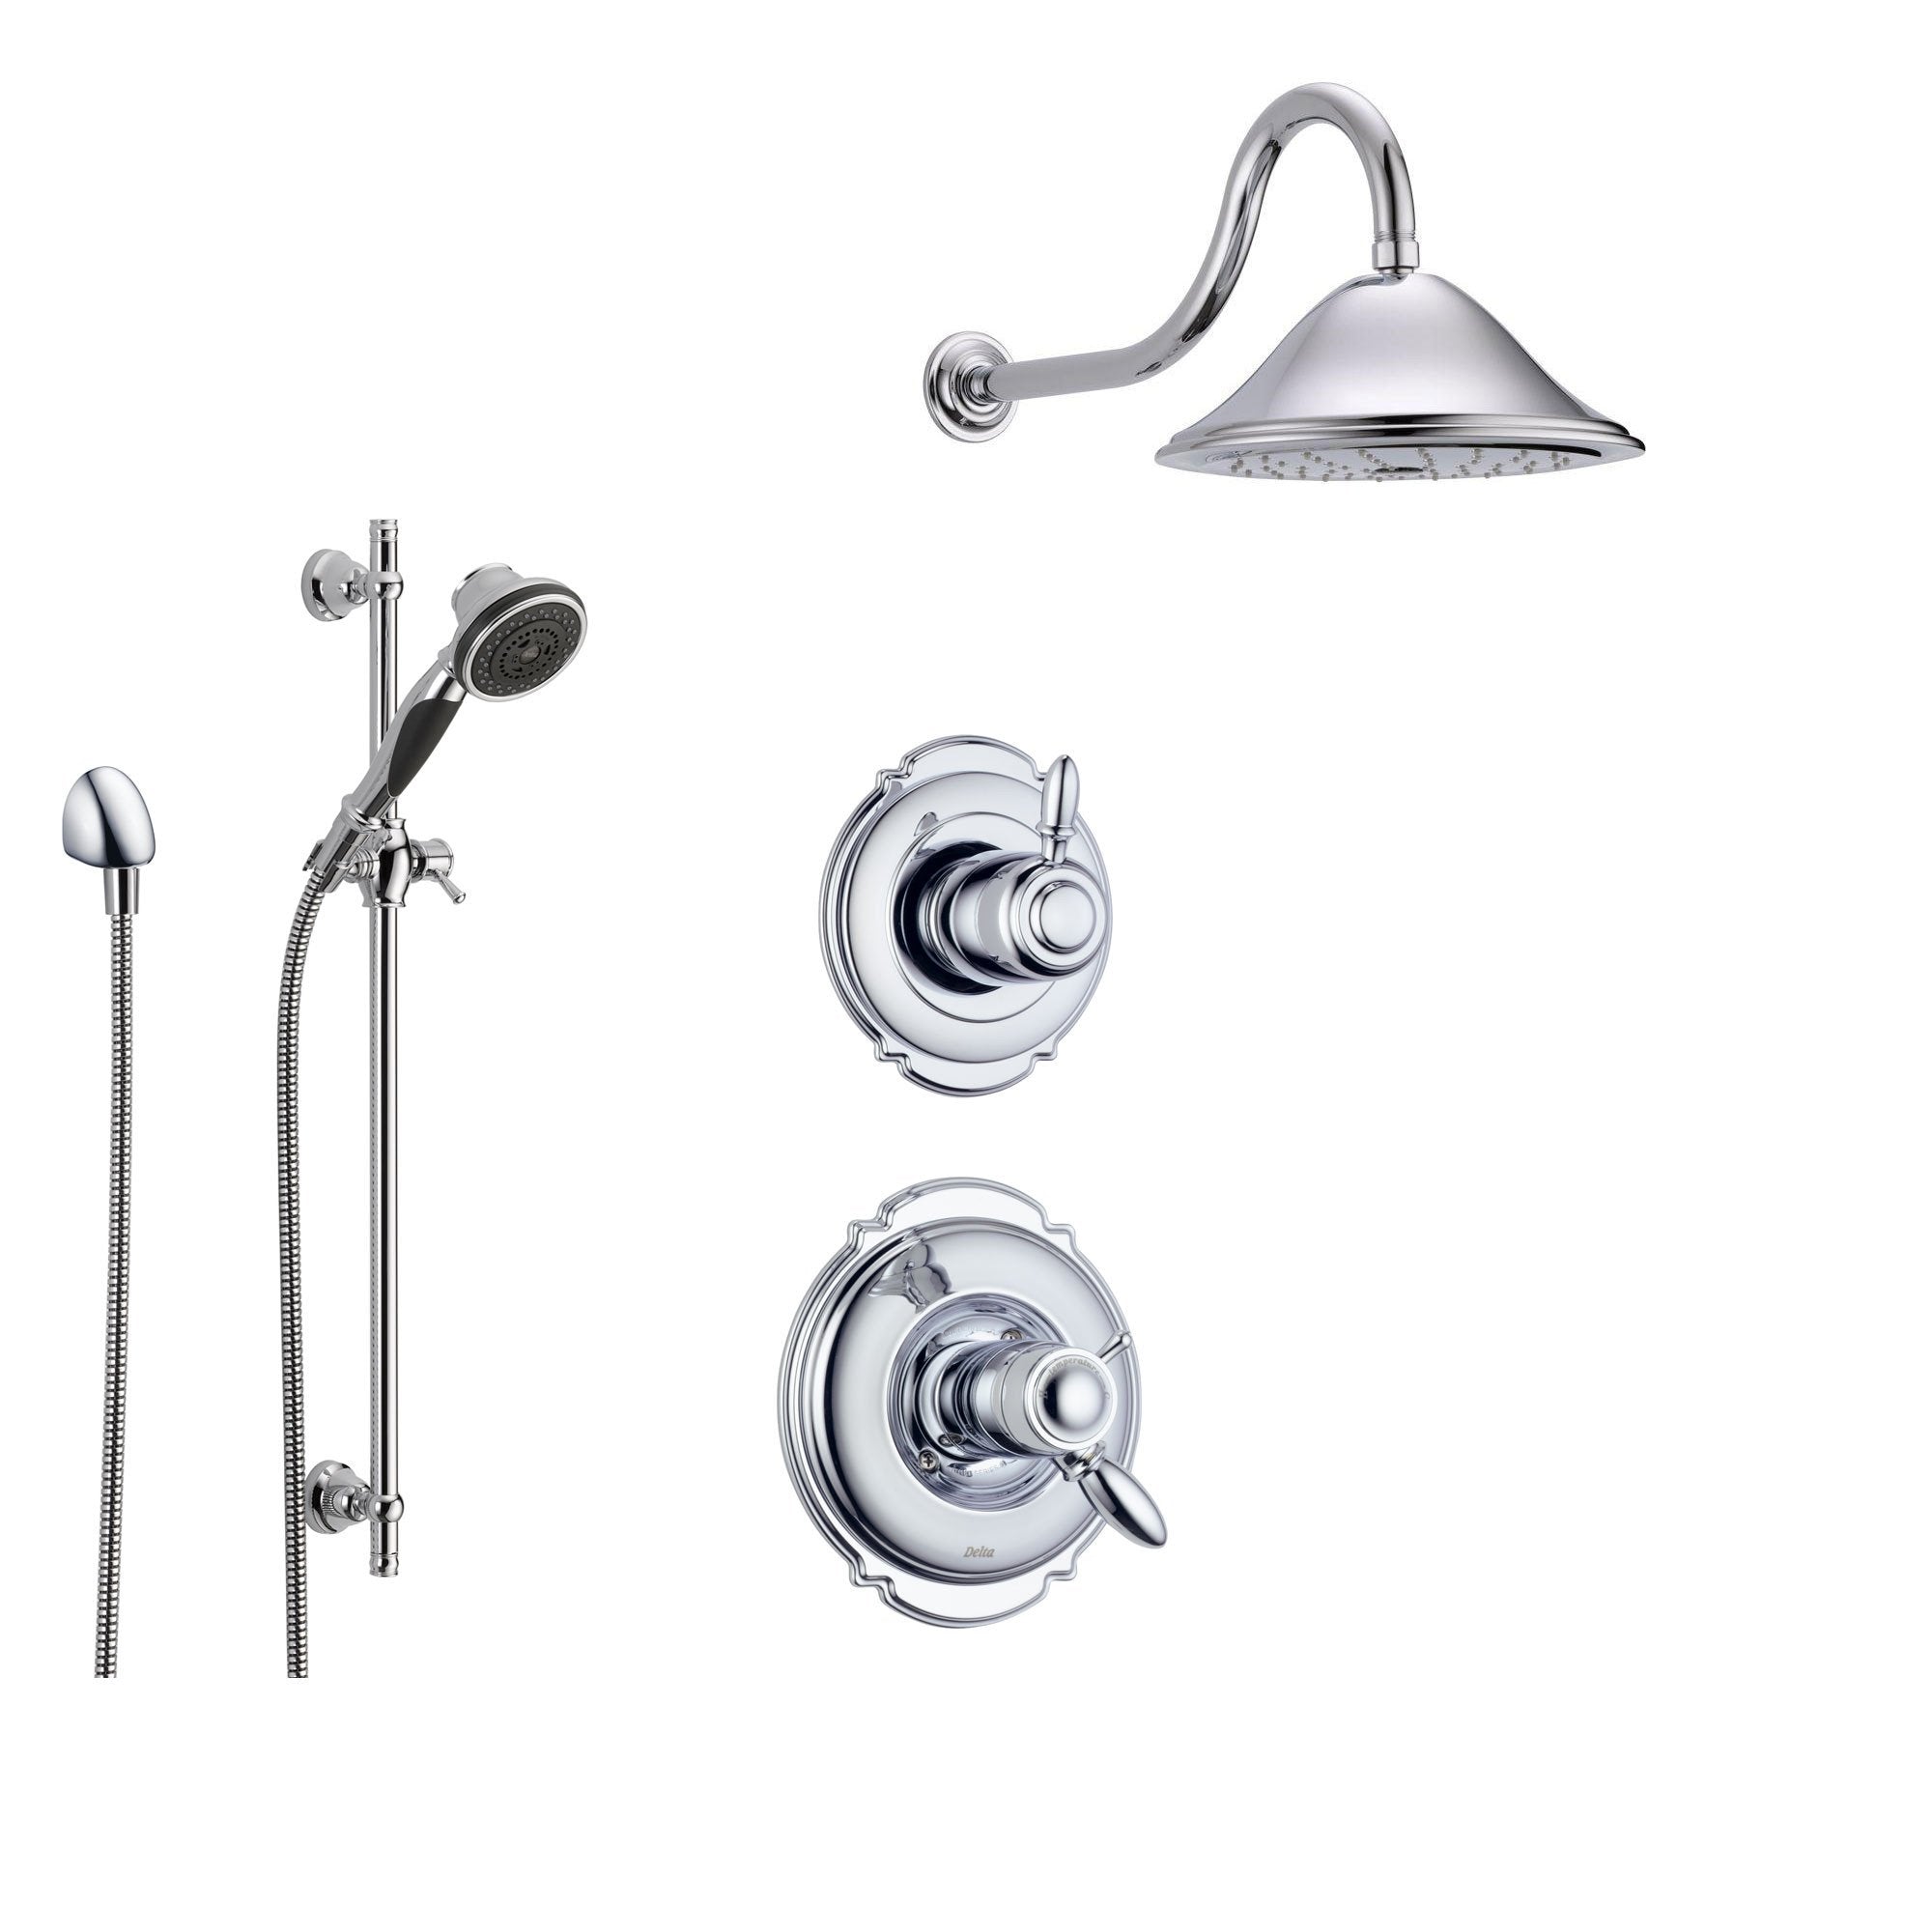 Delta Victorian Chrome Shower System with Thermostatic Shower Handle, 3-setting Diverter, Large Rain Showerhead, and Handheld Shower SS17T5582